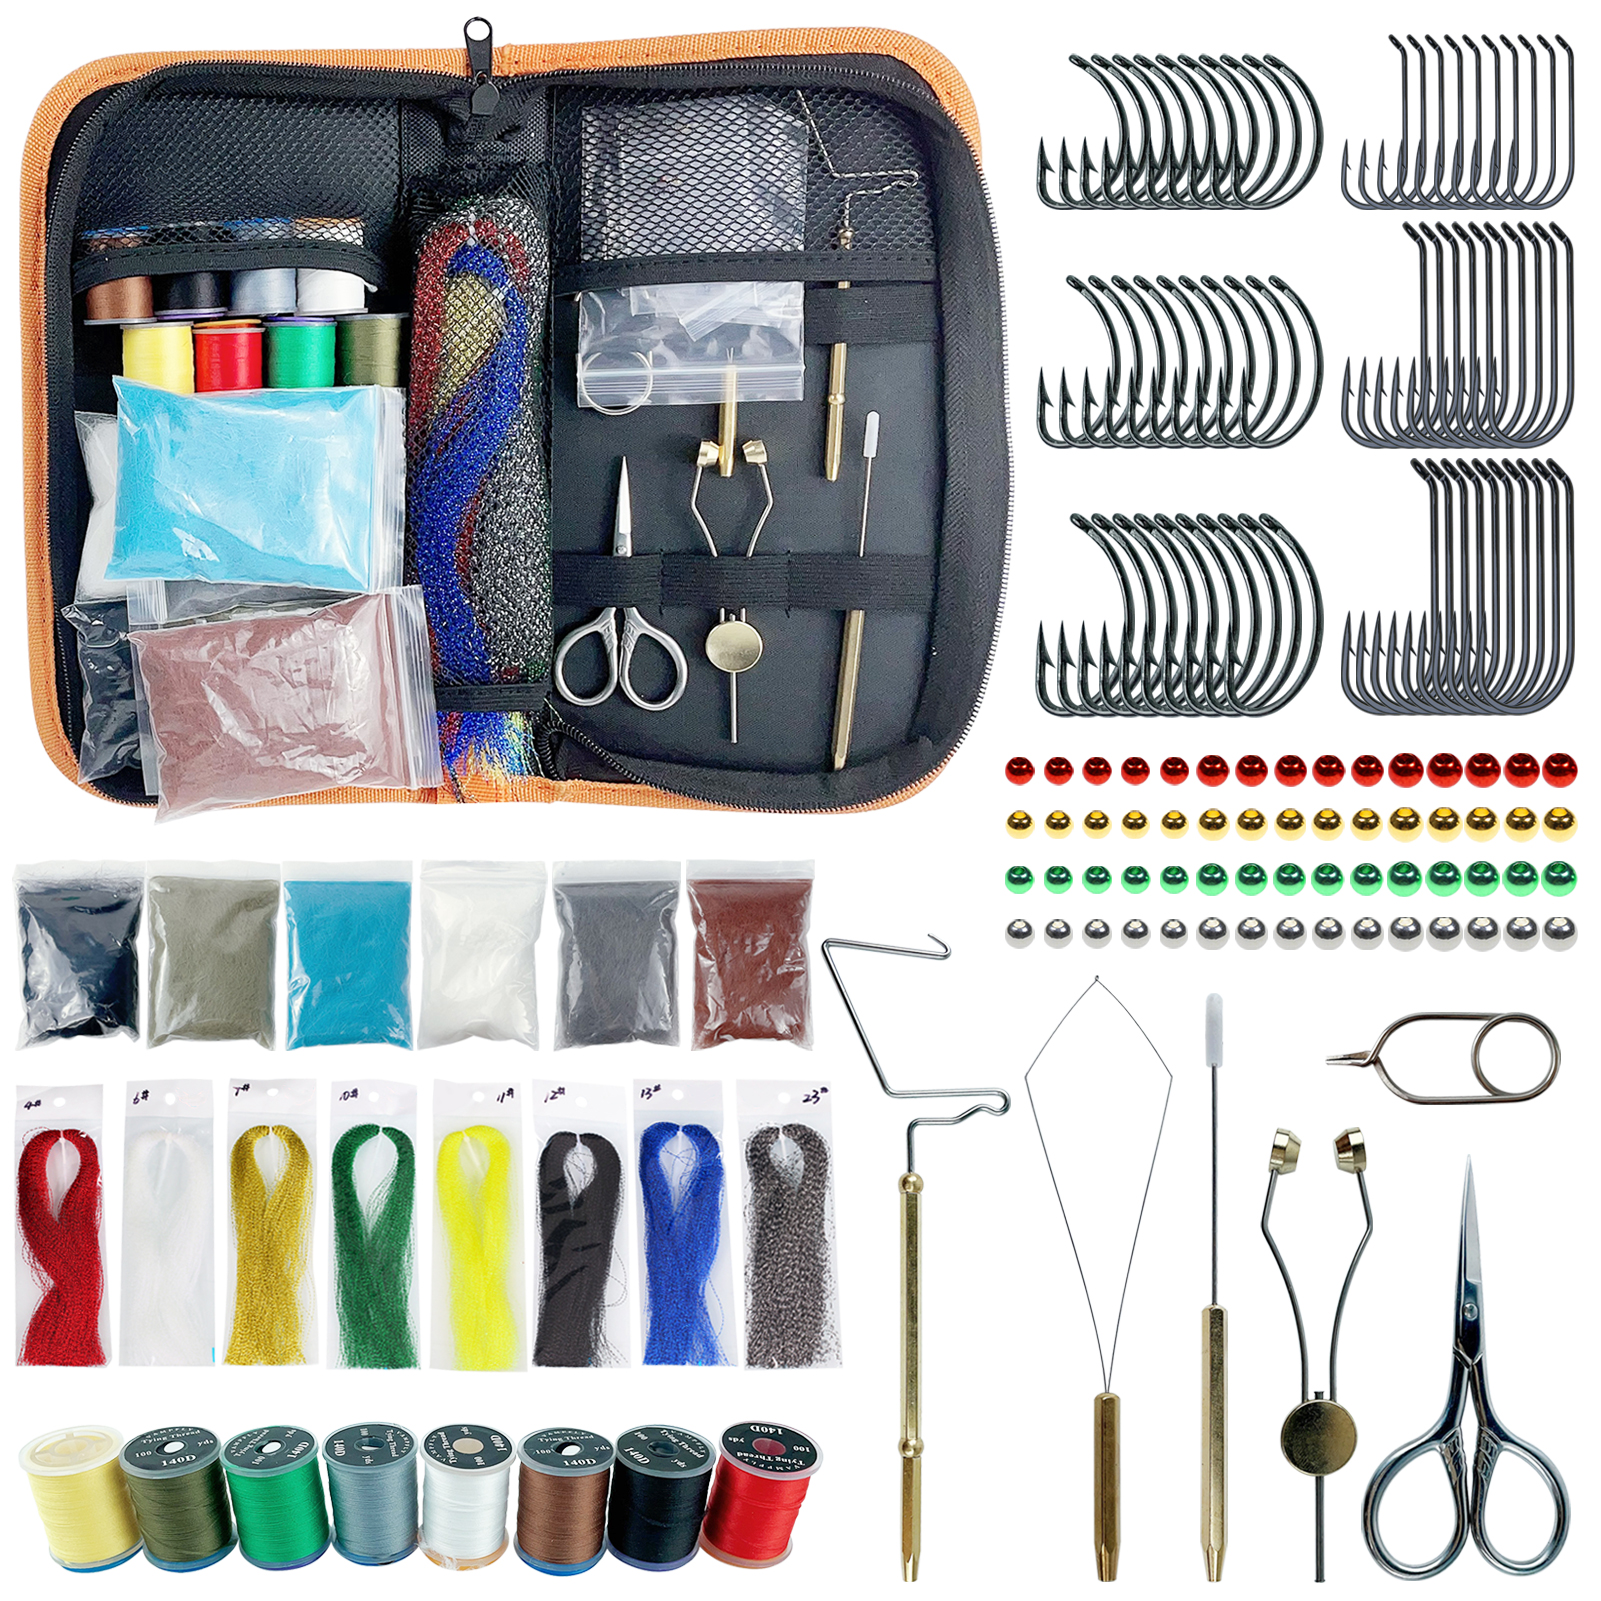 FREE FISHER Fly Tying Tool Kit 149pcs Fishing Flies Whip Finisher Tying Bobin Scissors Lure Baits Twister Hair Materials Threader Knotter